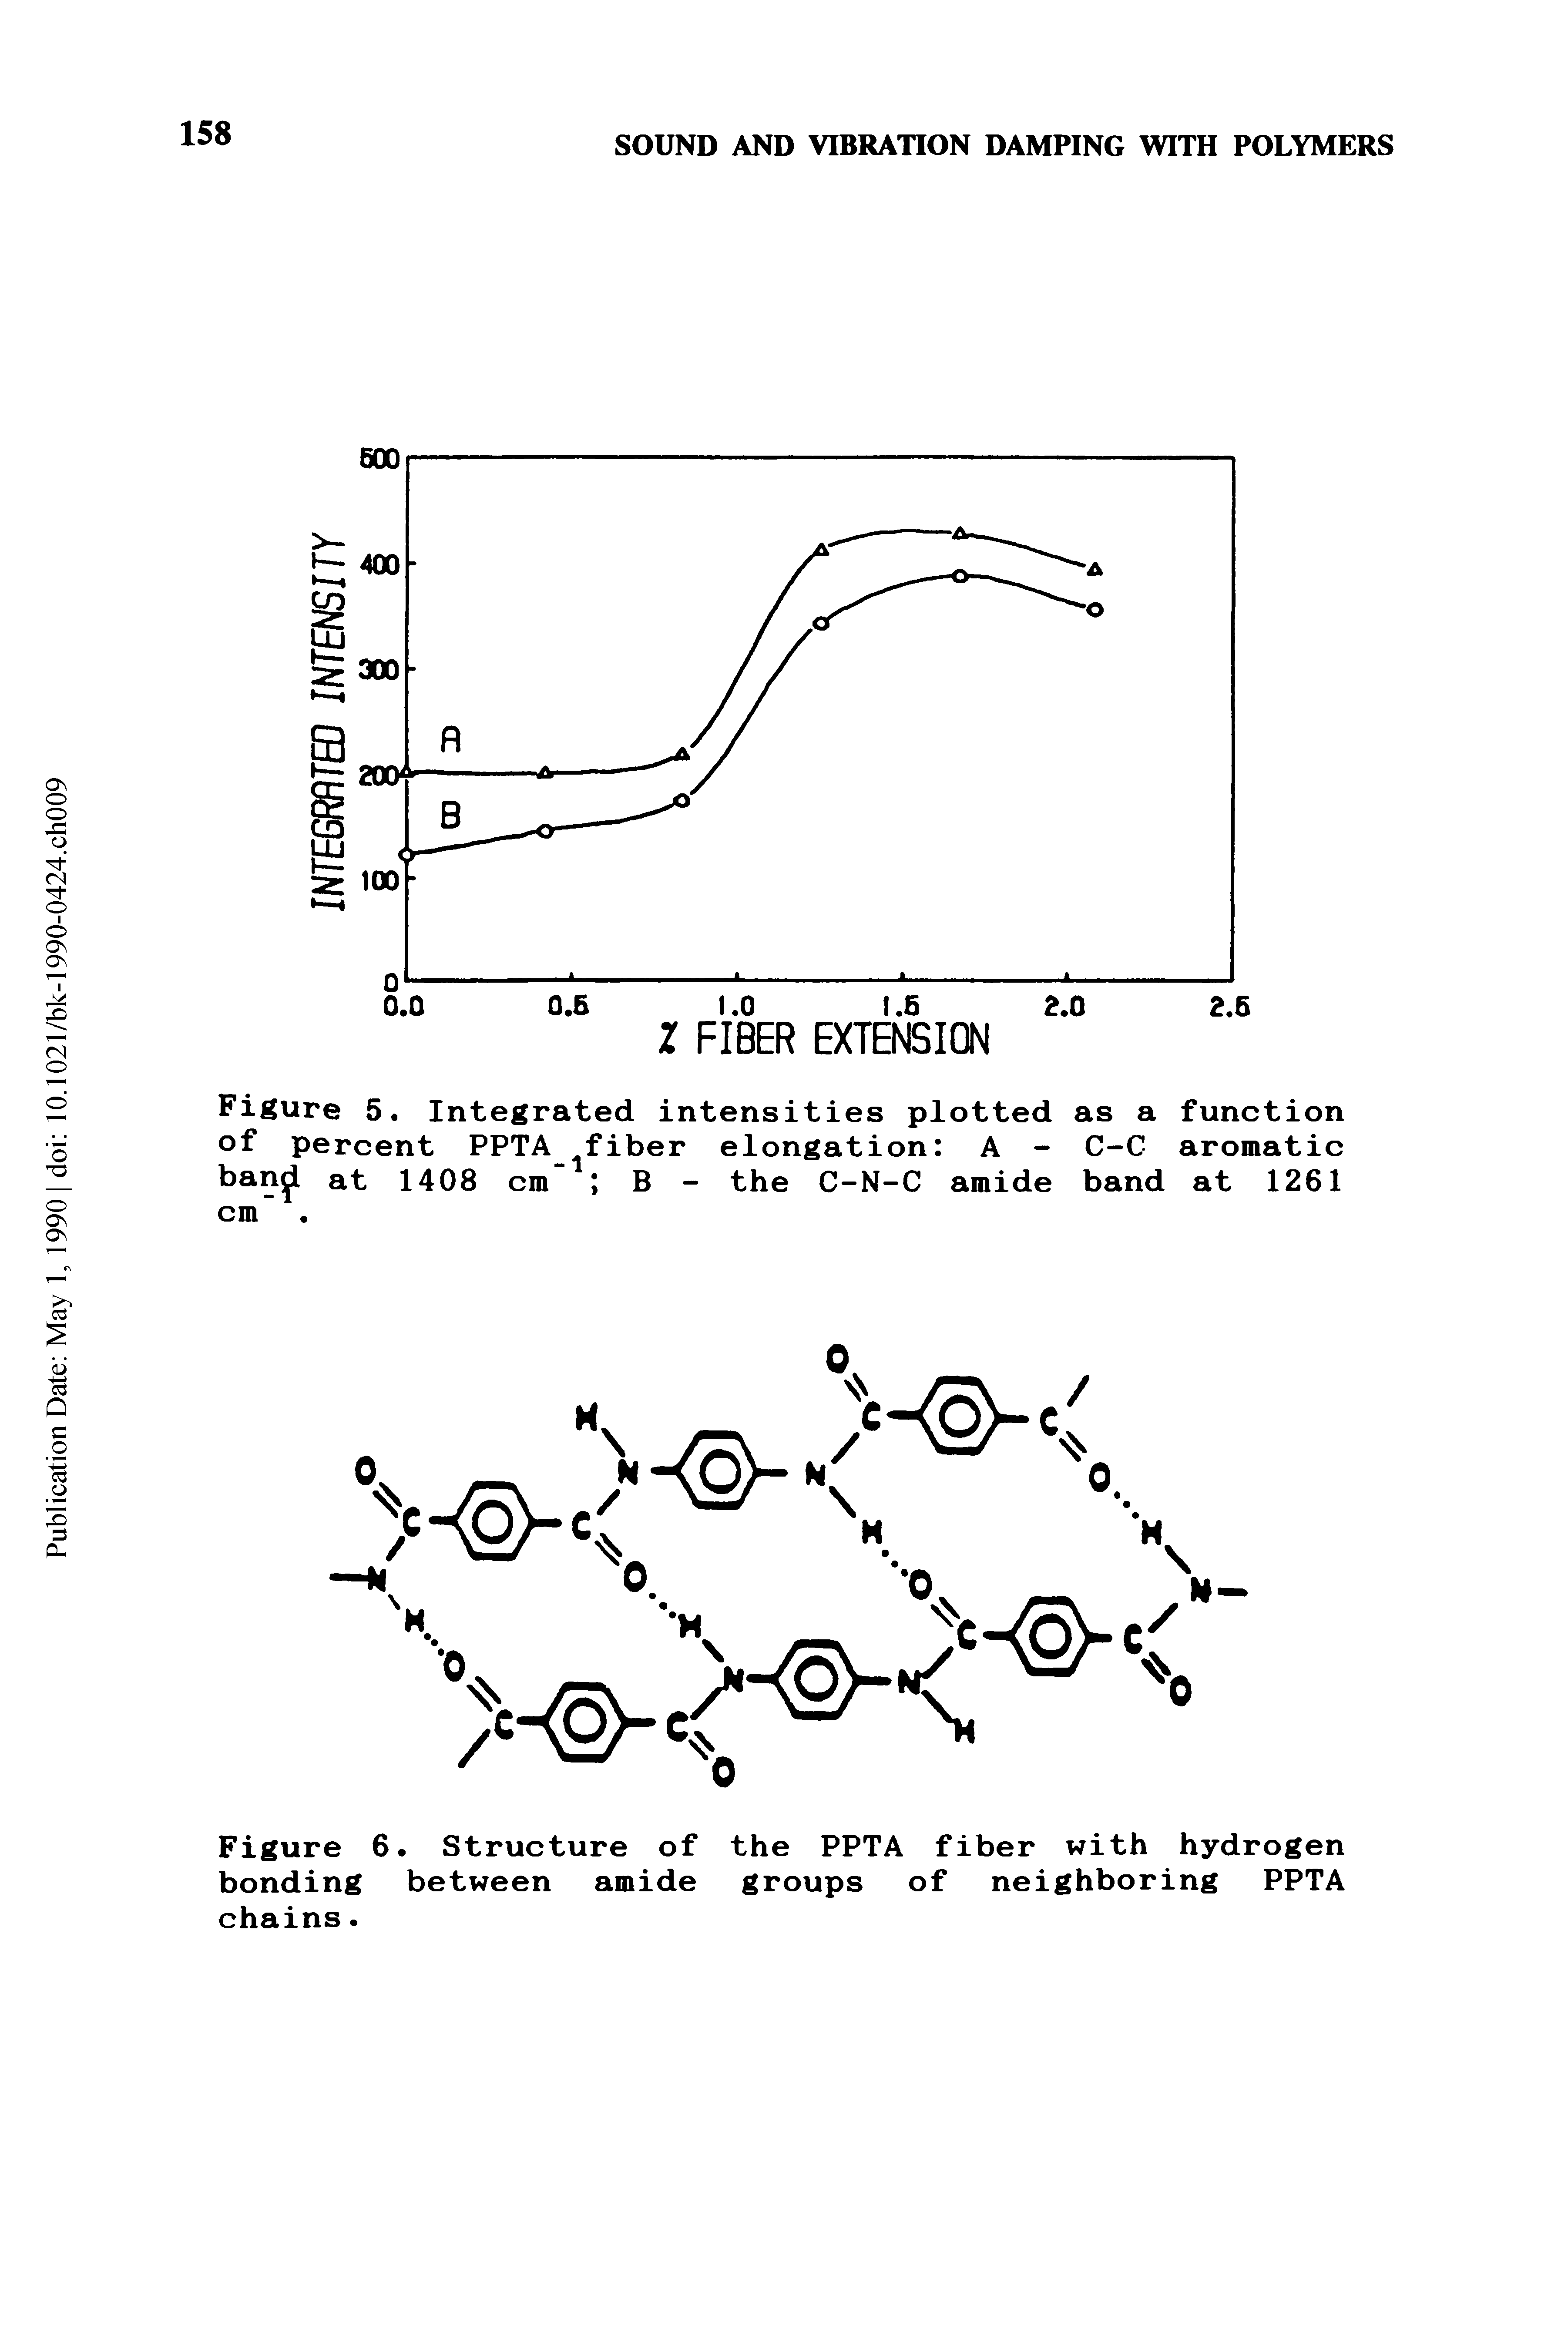 Figure 6. Structure of the PPTA fiber with hydrogen bonding between amide groups of neighboring PPTA chains.